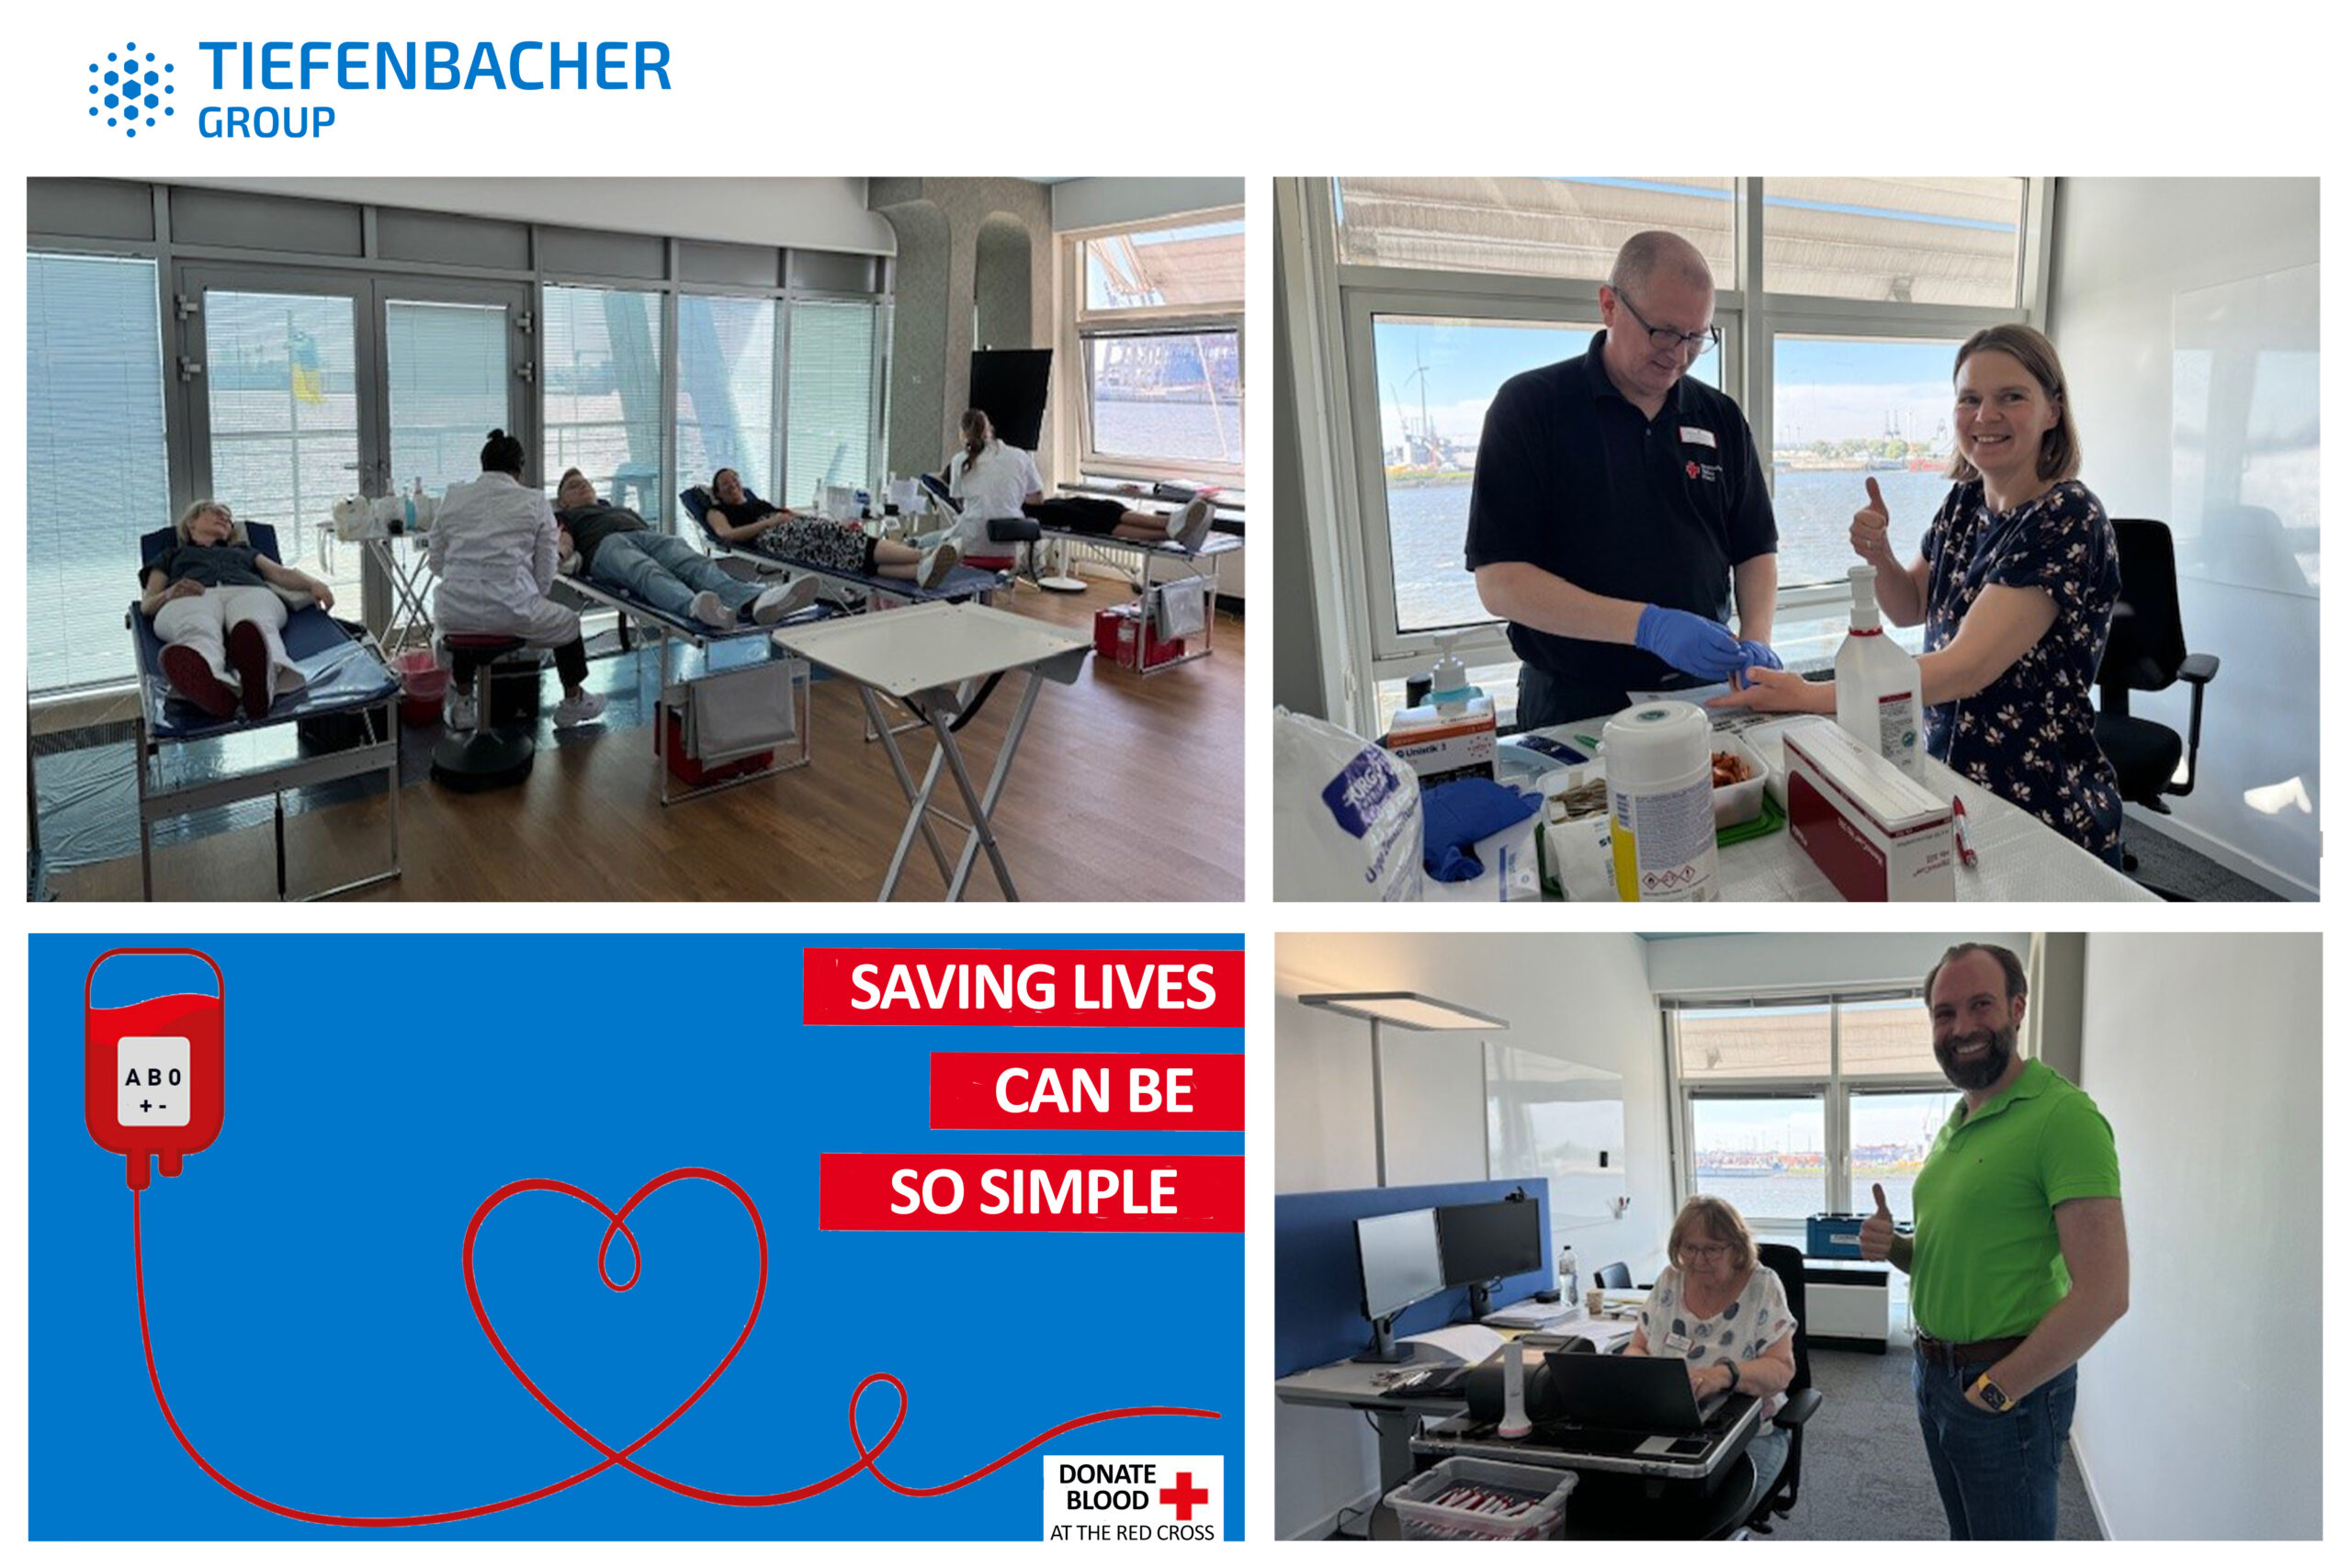 Tiefenbacher Group draws attention to blood donation